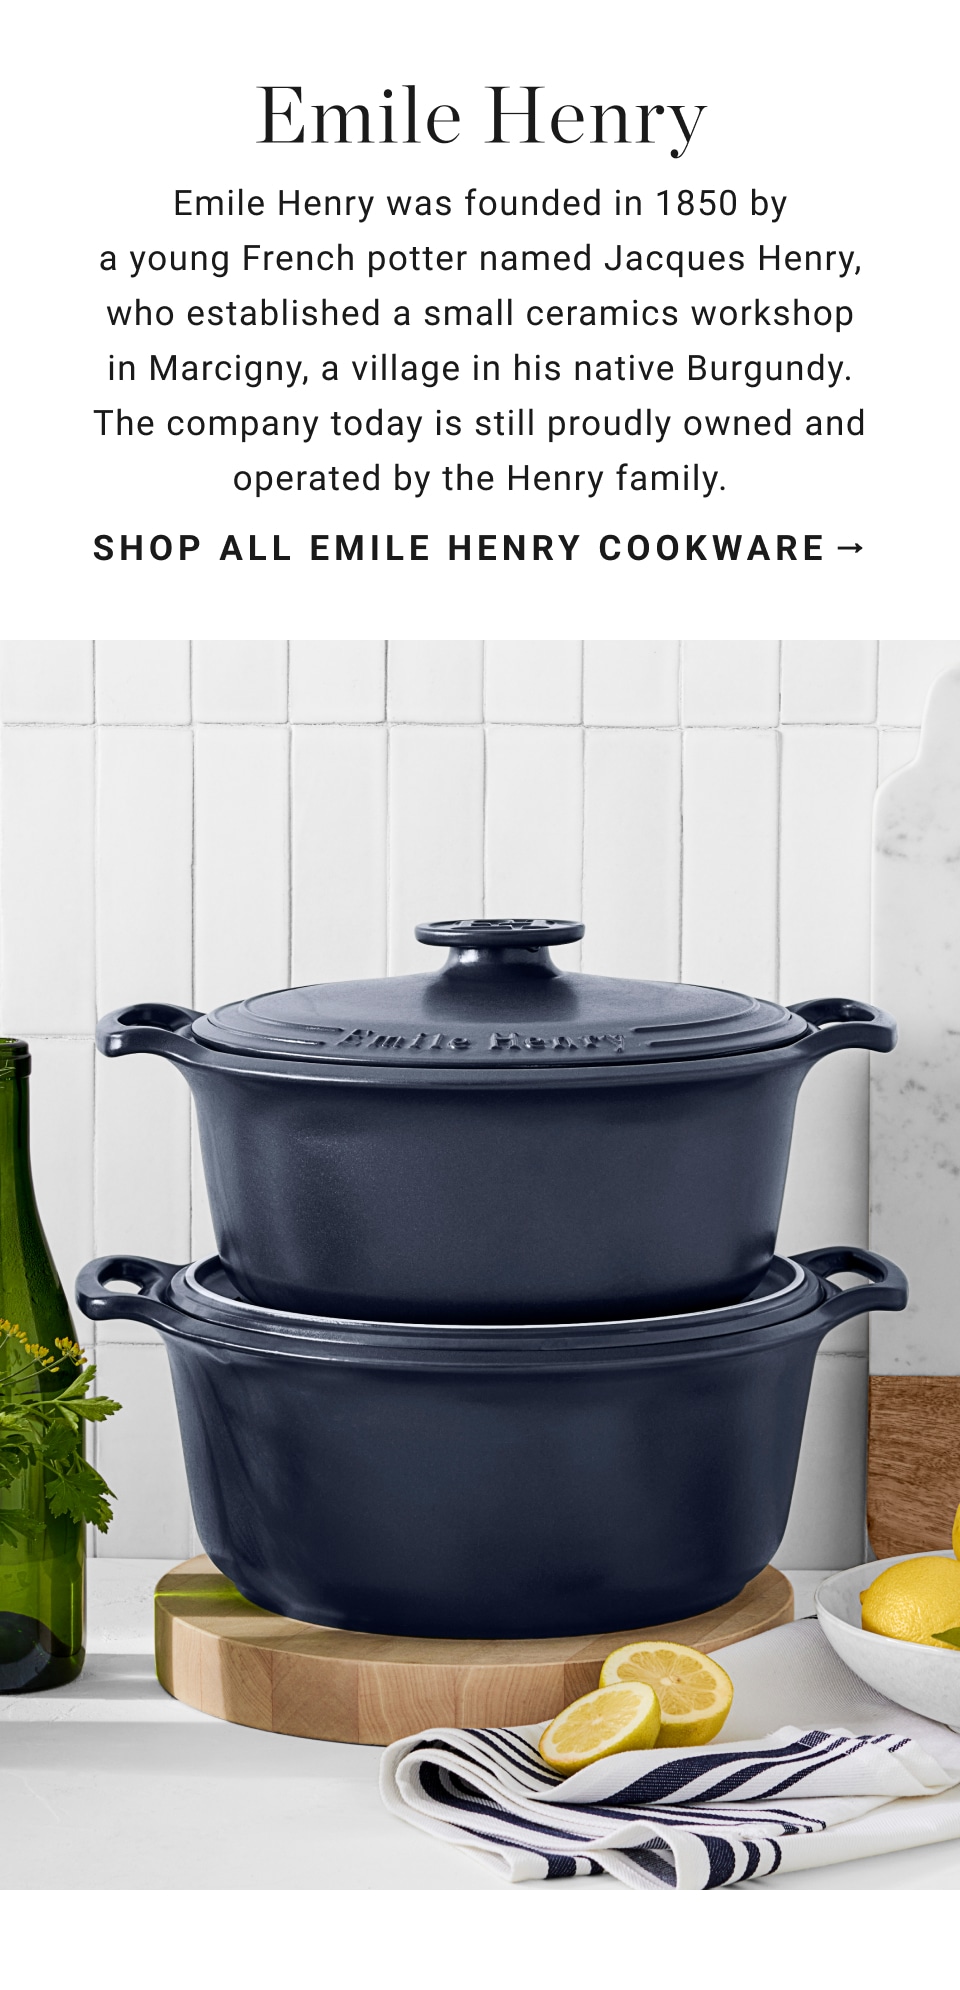 Emile Henry Cookware